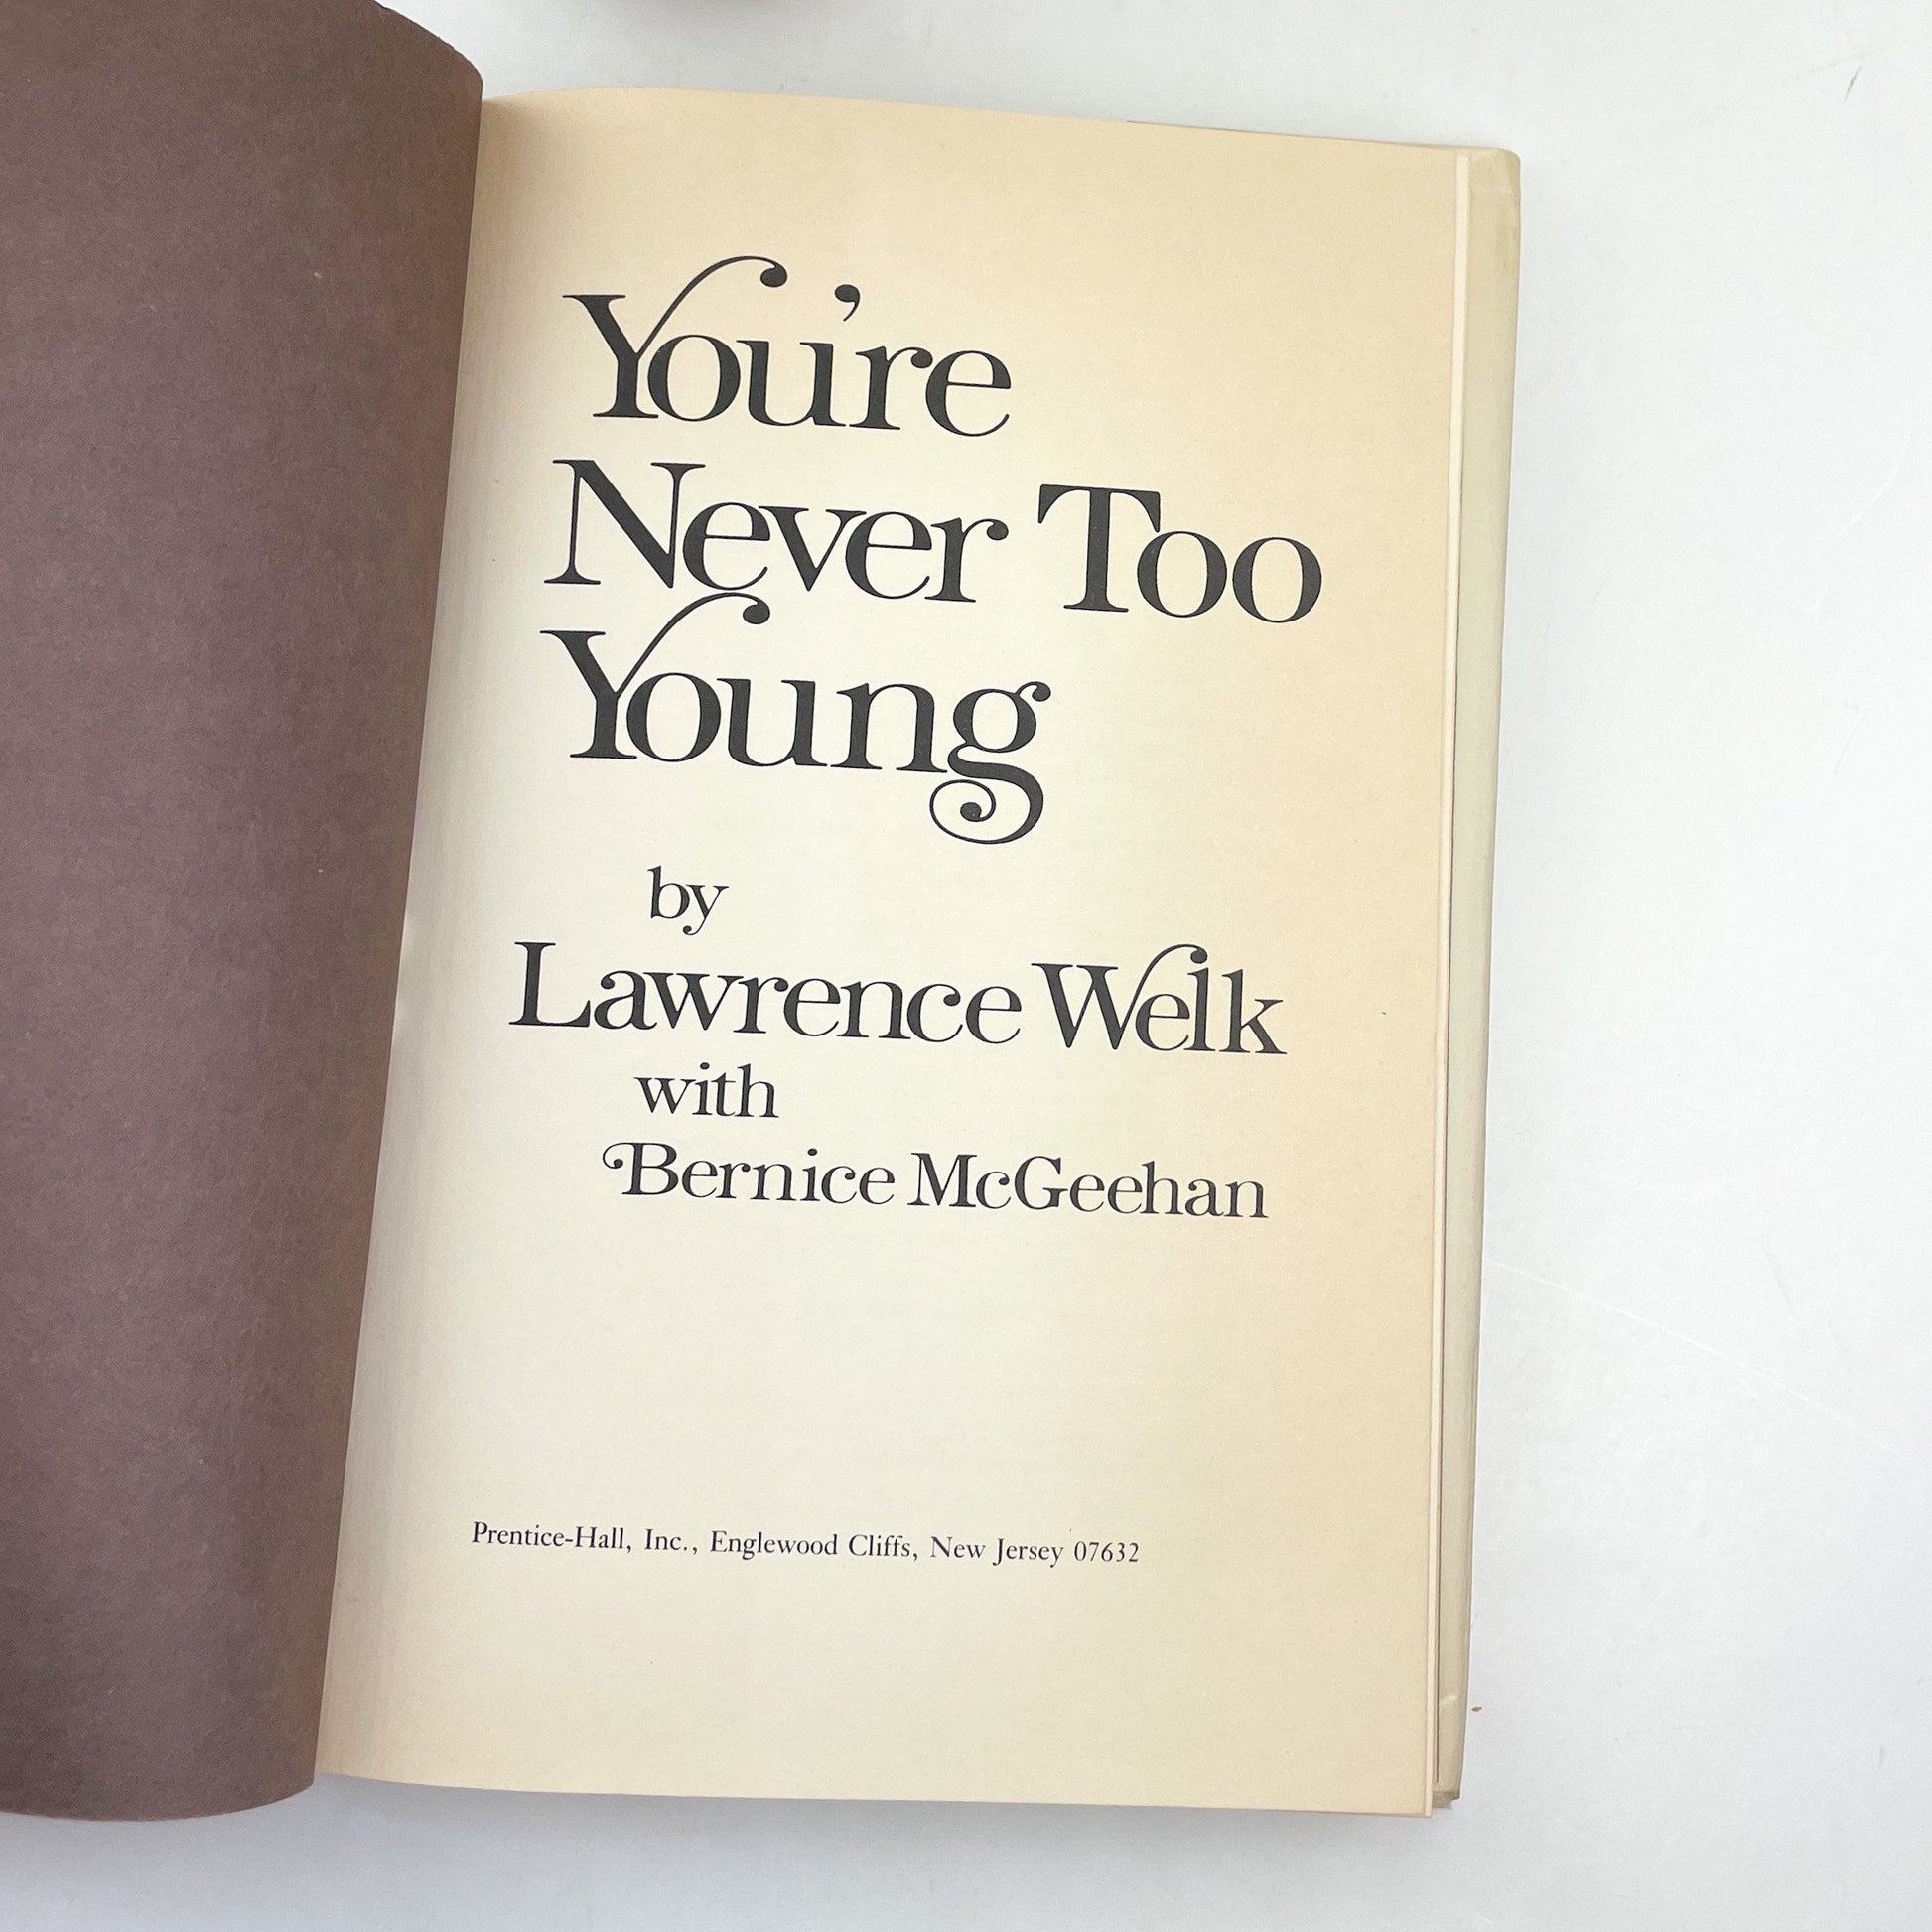 You're Never Too Young by Lawrence Welk